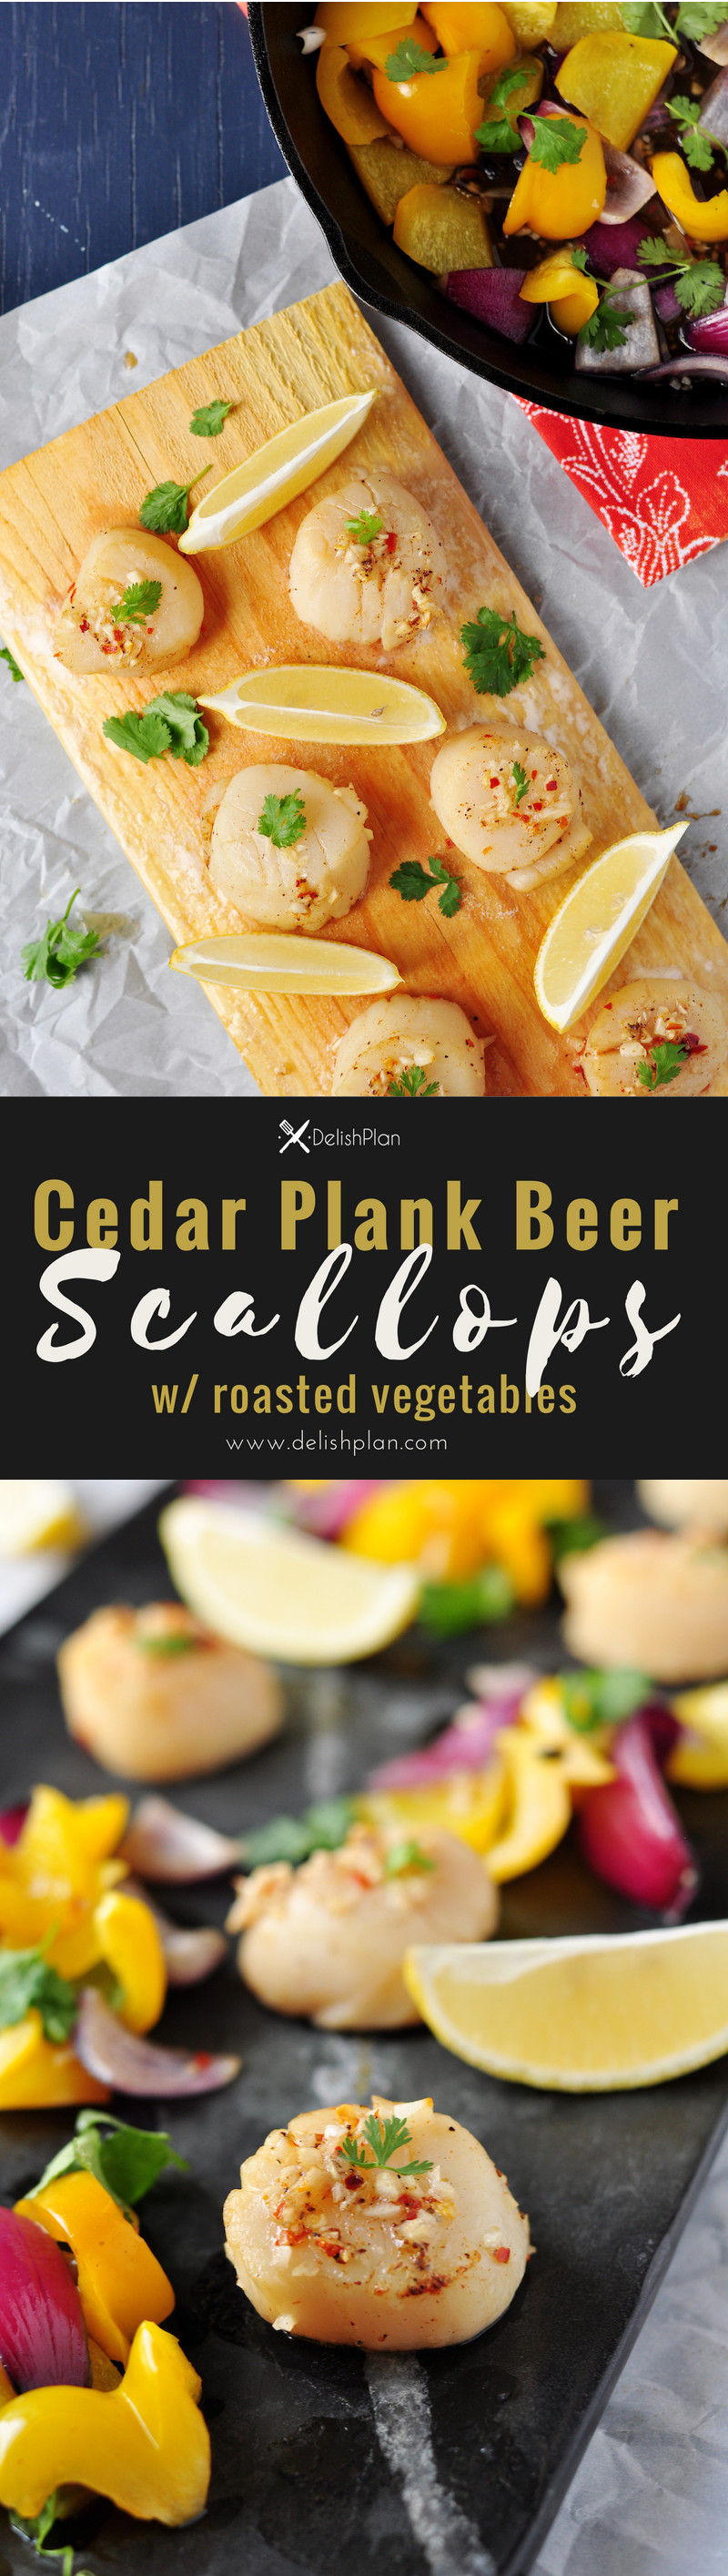 Marinated scallops baked/grilled on a cedar plank that's soaked in beer along with vegetables, these cedar plank beer scallops make a great low-carb meal.